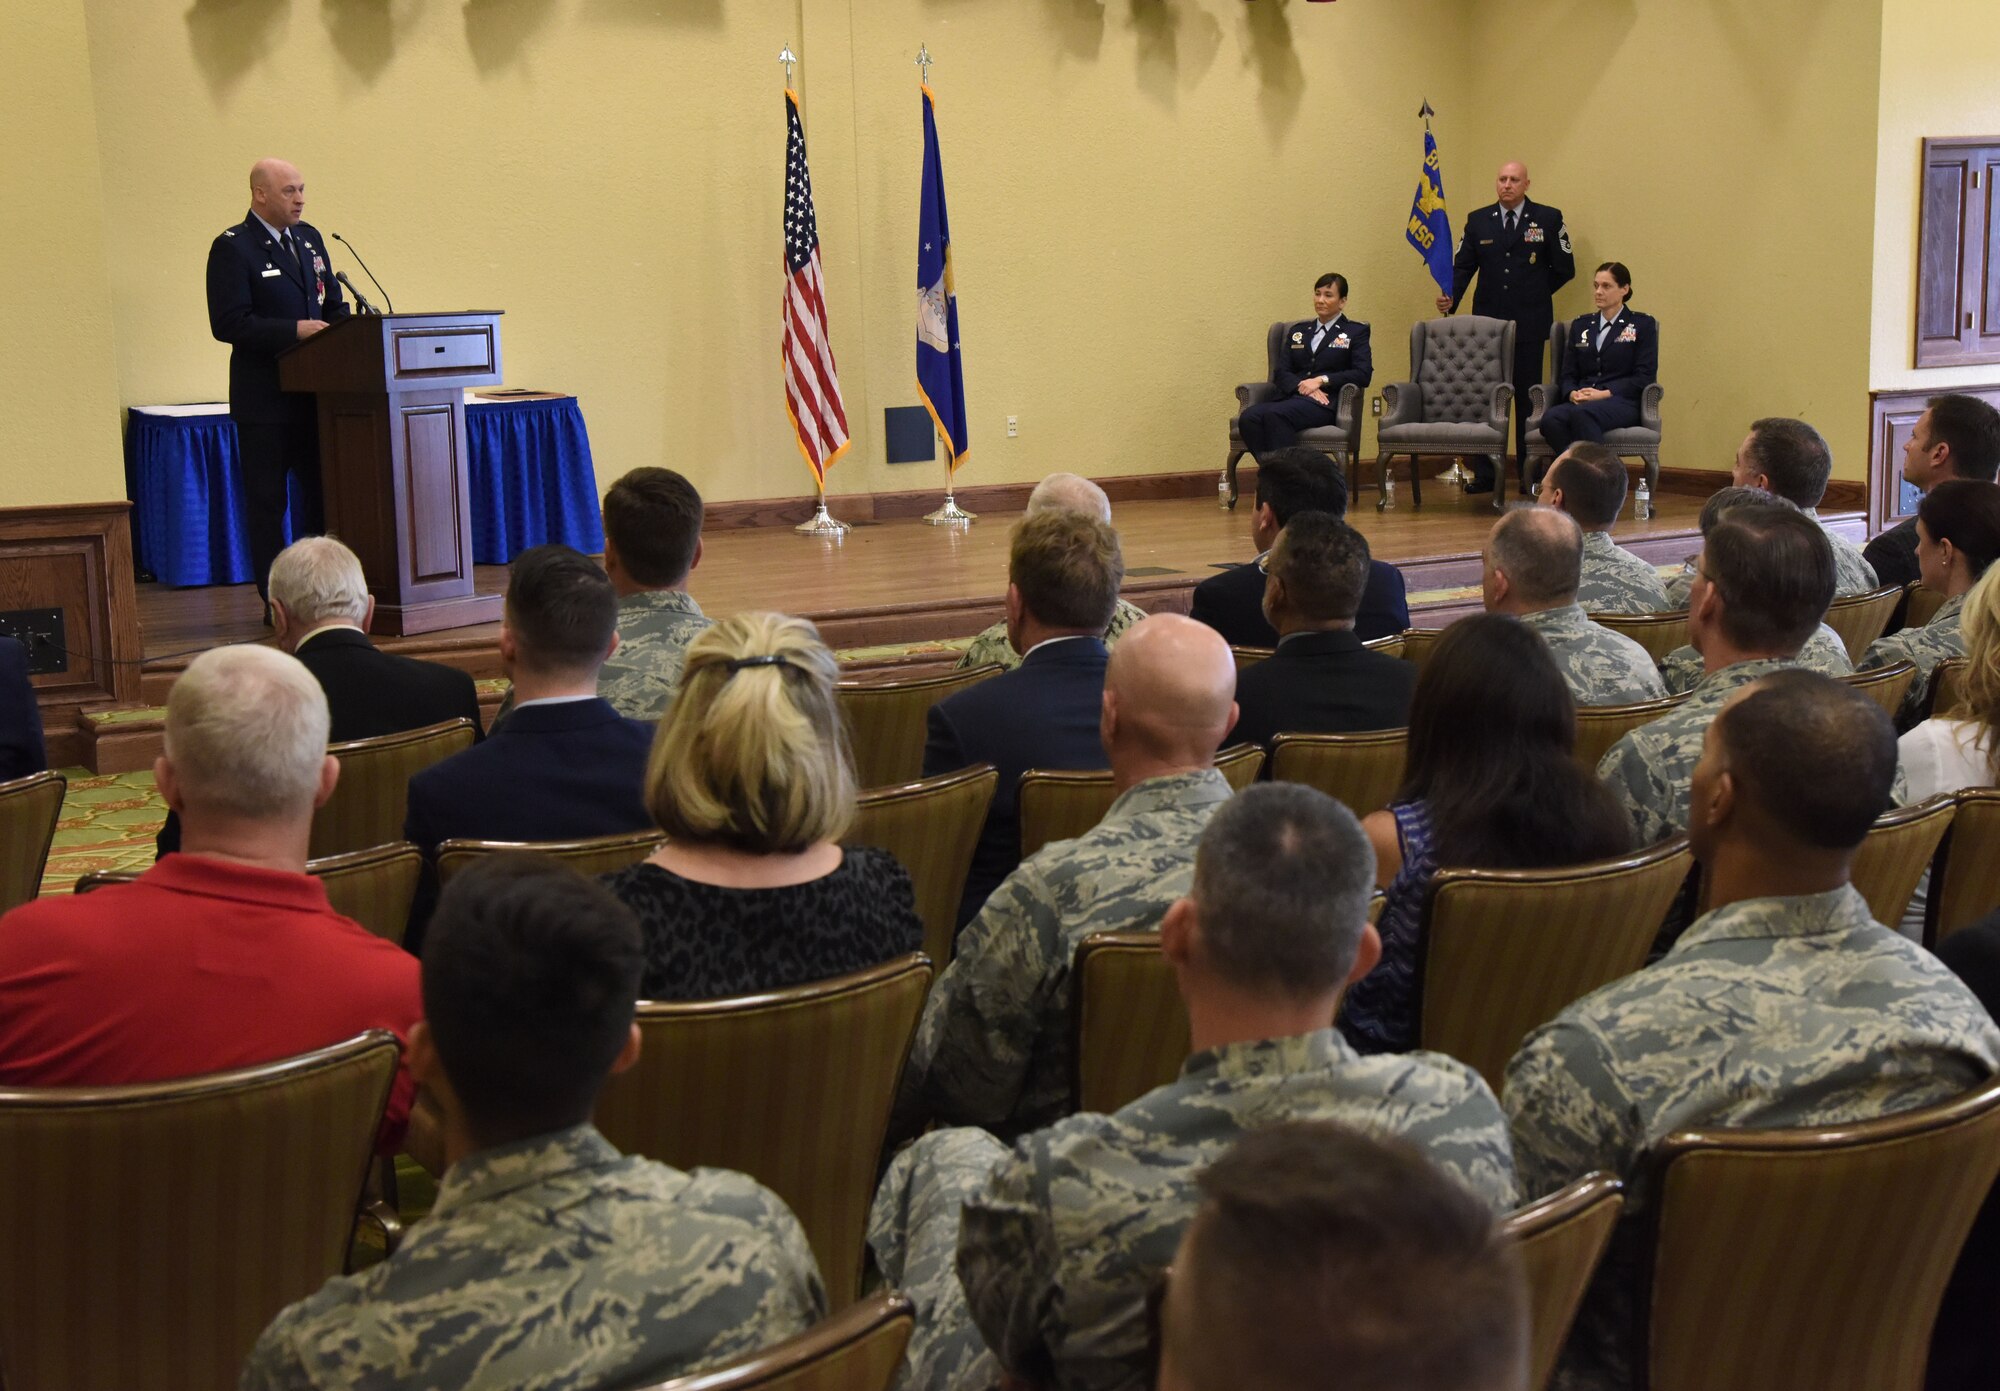 U.S. Air Force Col. Danny Davis, outgoing 81st Mission Support Group commander, delivers remarks during the 81st MSG change of command ceremony in the Bay Breeze Event Center at Keesler Air Force Base, Mississippi, July 19, 2018. Davis relinquished command of the 81st MSG and will be assigned to 2nd Air Force until he retires in September 2018, with more than 24 years of military service. (U.S. Air Force photo by Kemberly Groue)